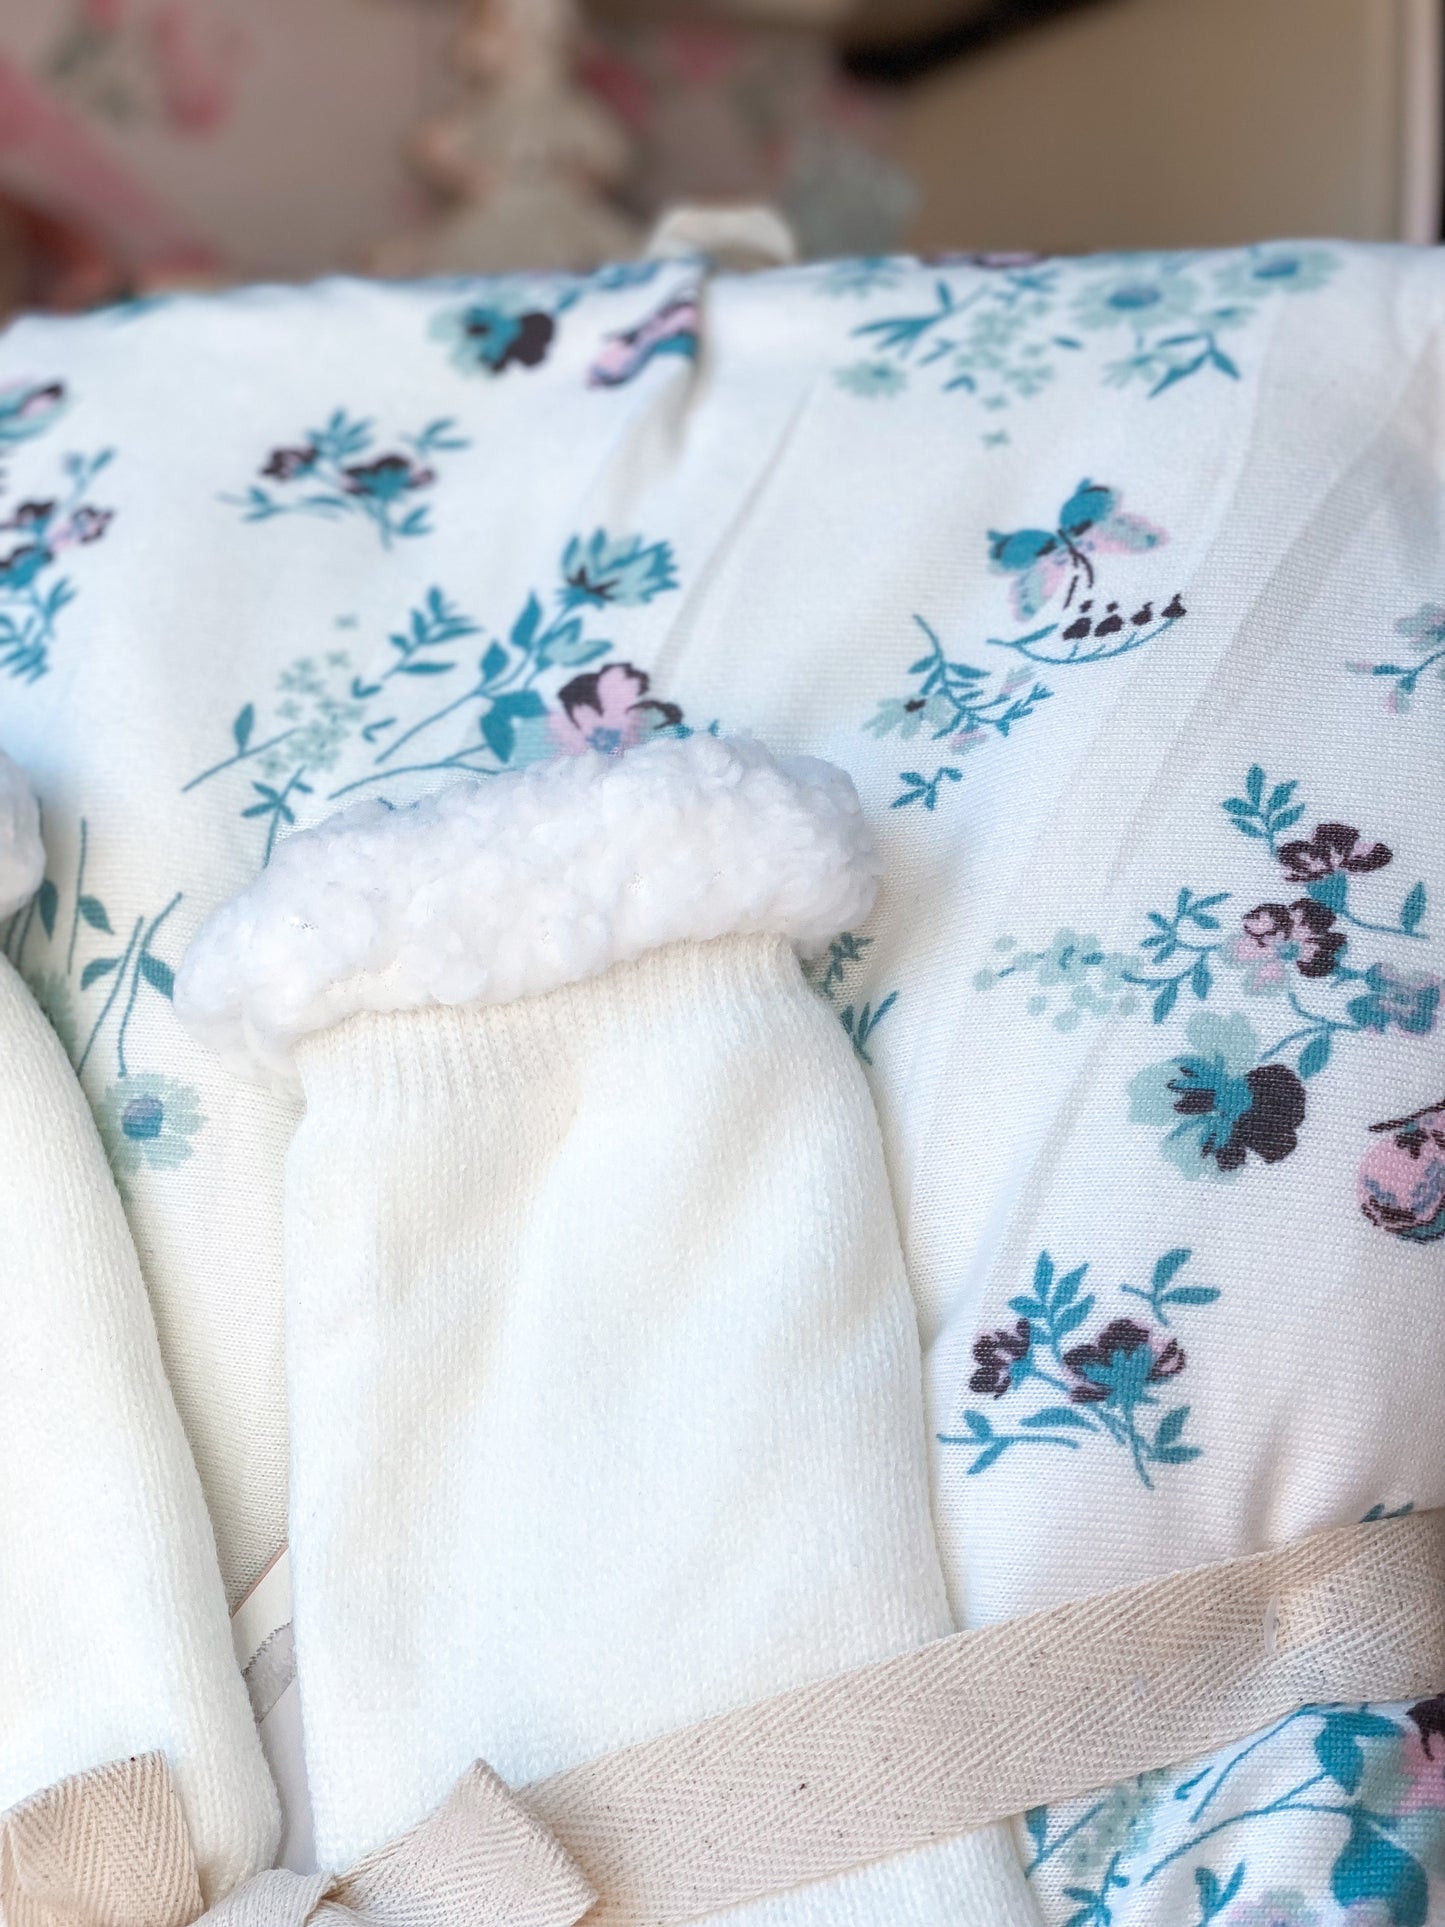 Shabby Chic white and blue floral blanket with butterflies